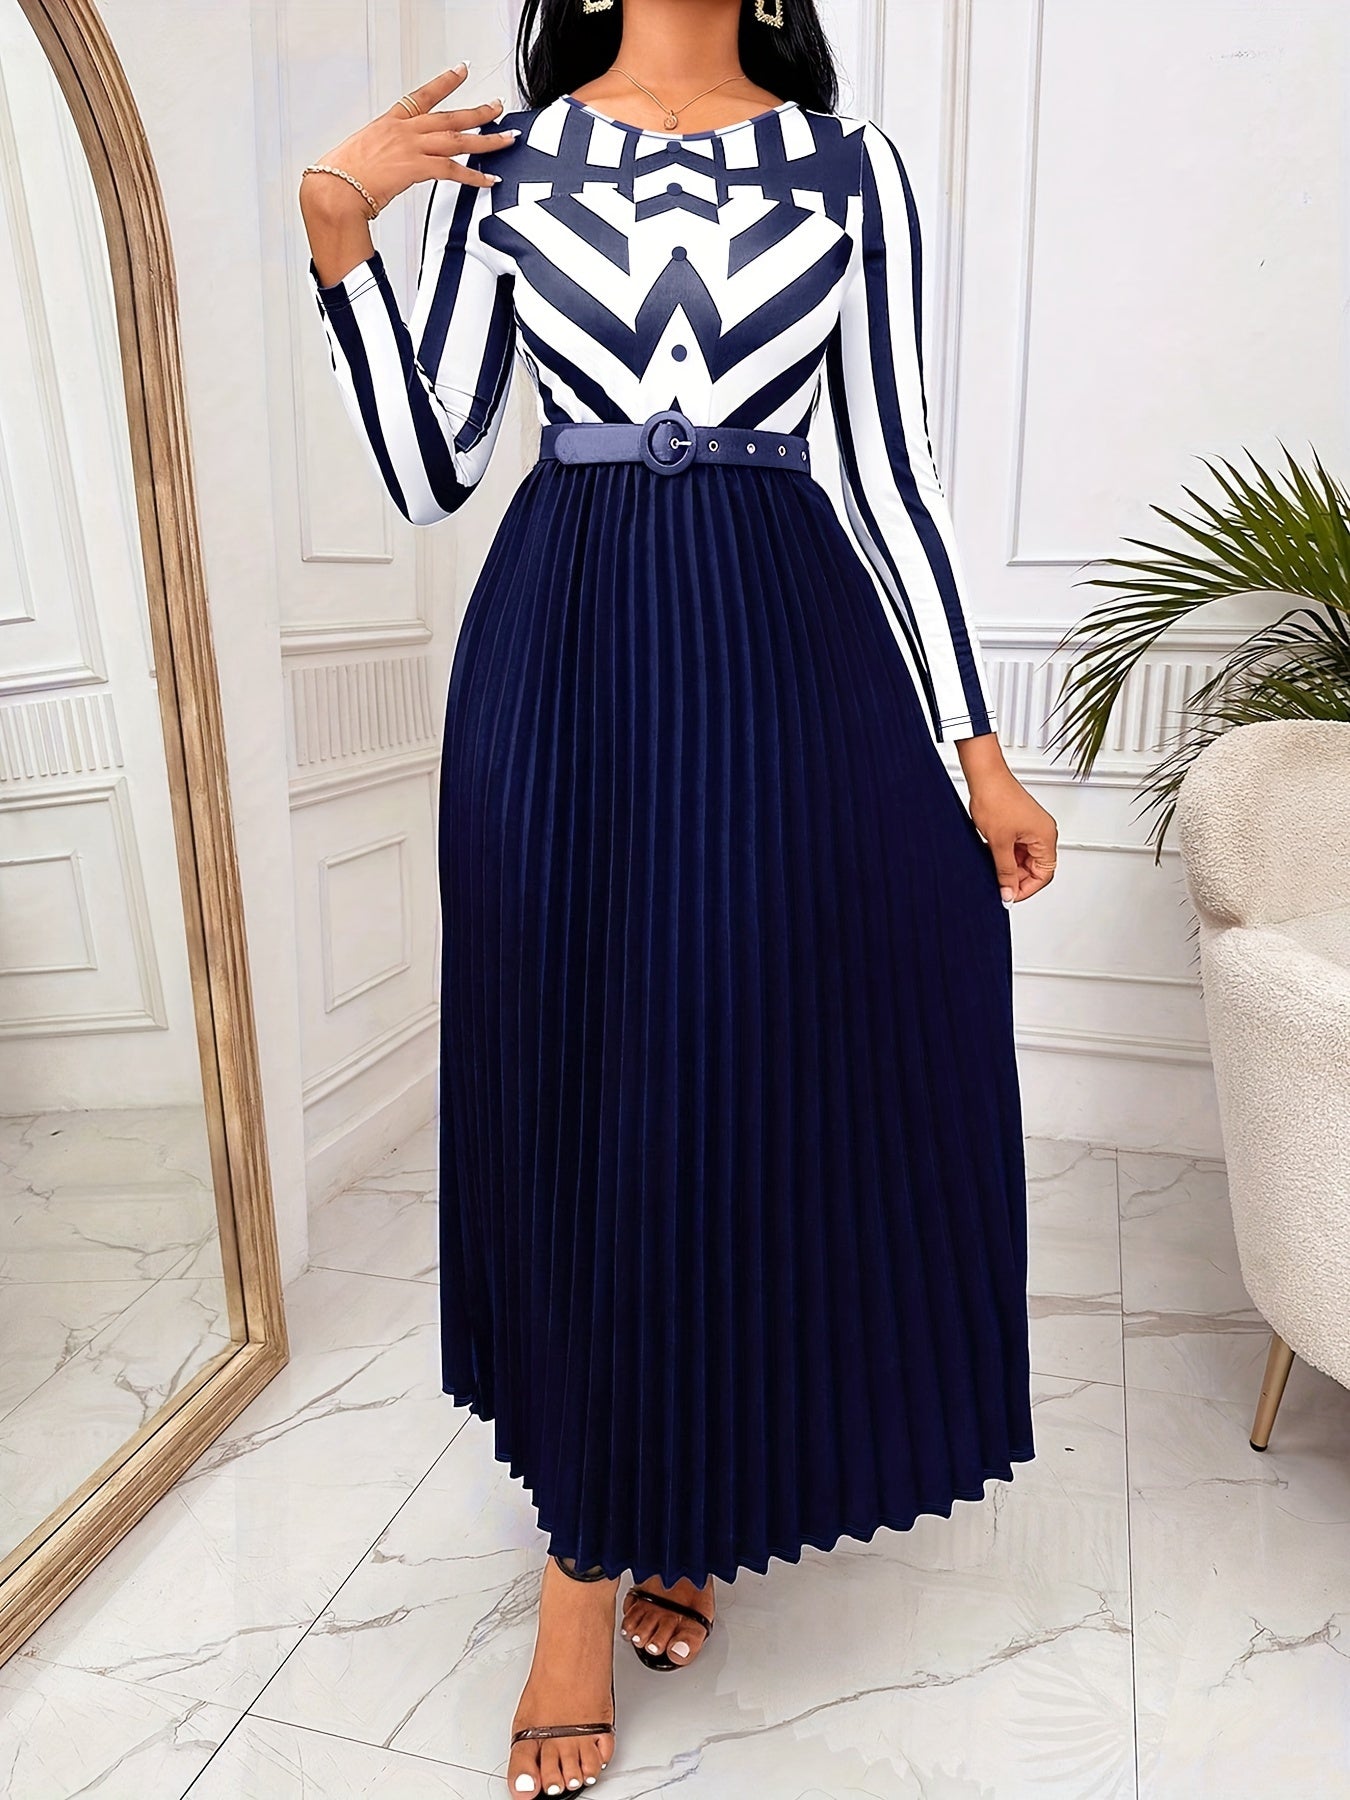 xieyinshe  Graphic Print Splicing Belted Dress, Elegant Pleated Long Sleeve Dress For Spring & Fall, Women's Clothing